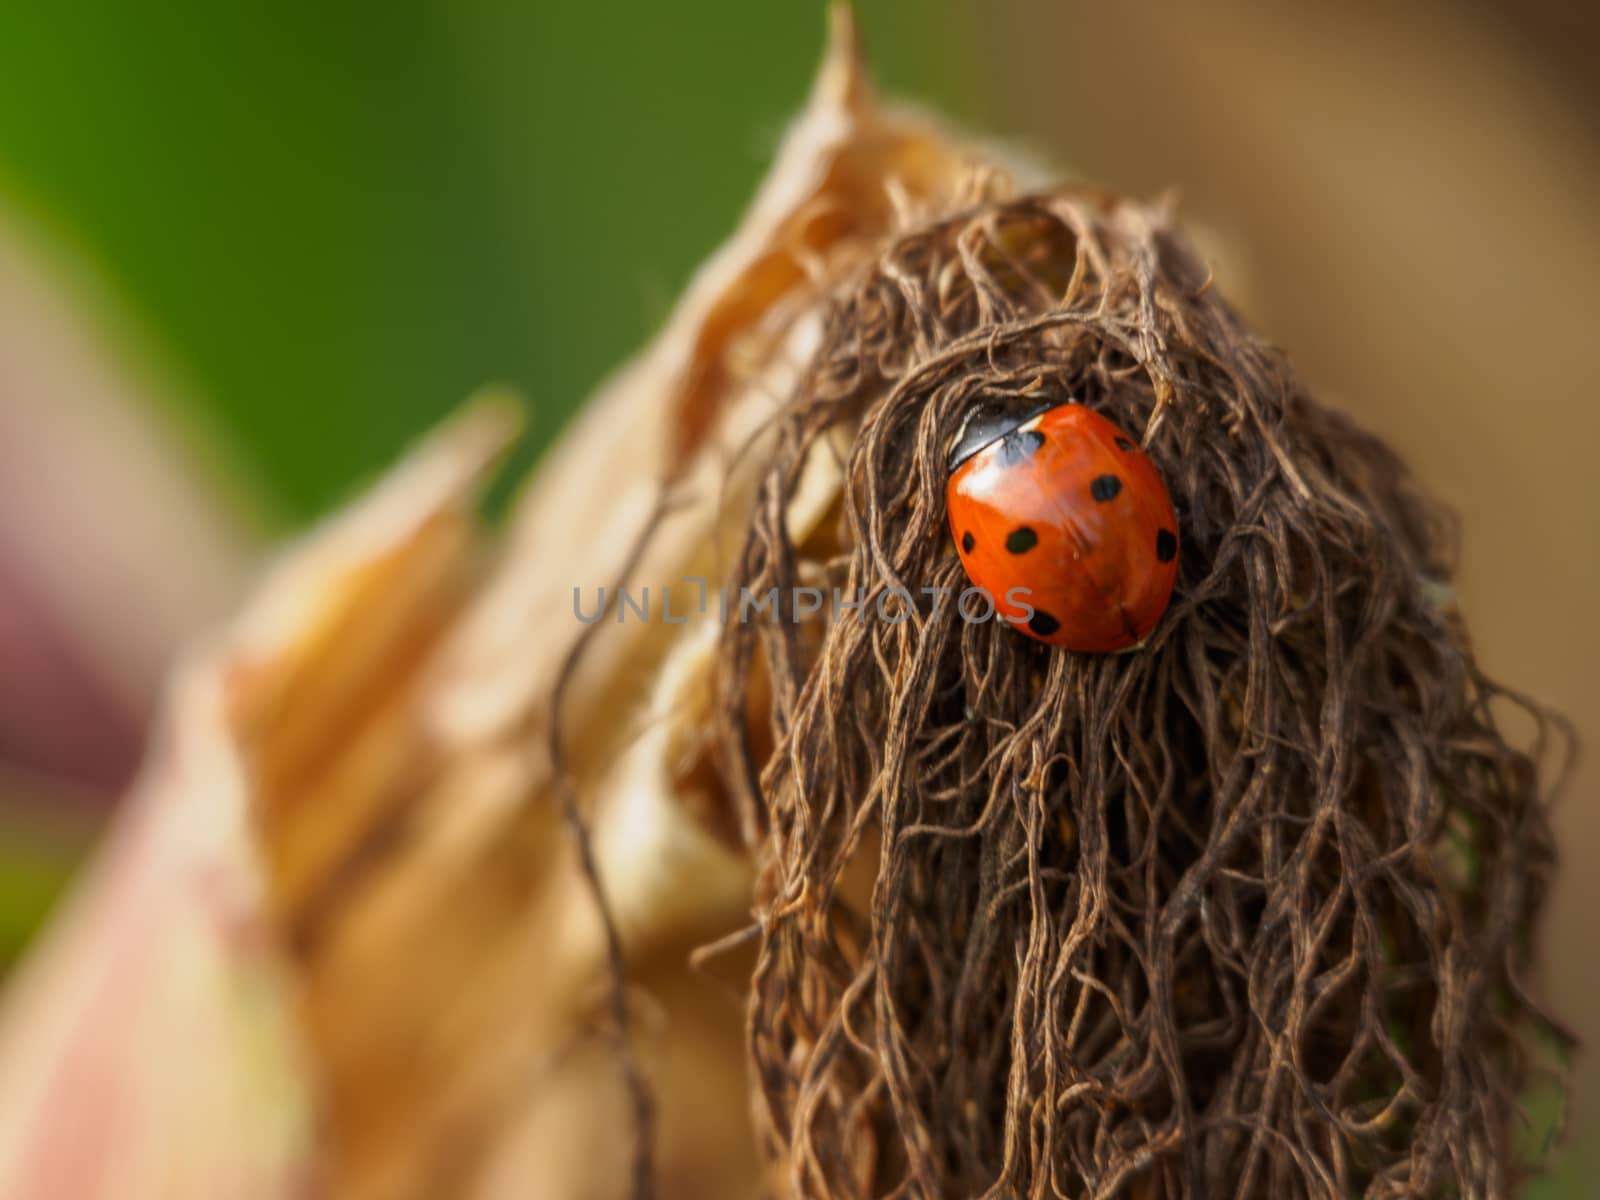 Ladybug resting on a crop of maize